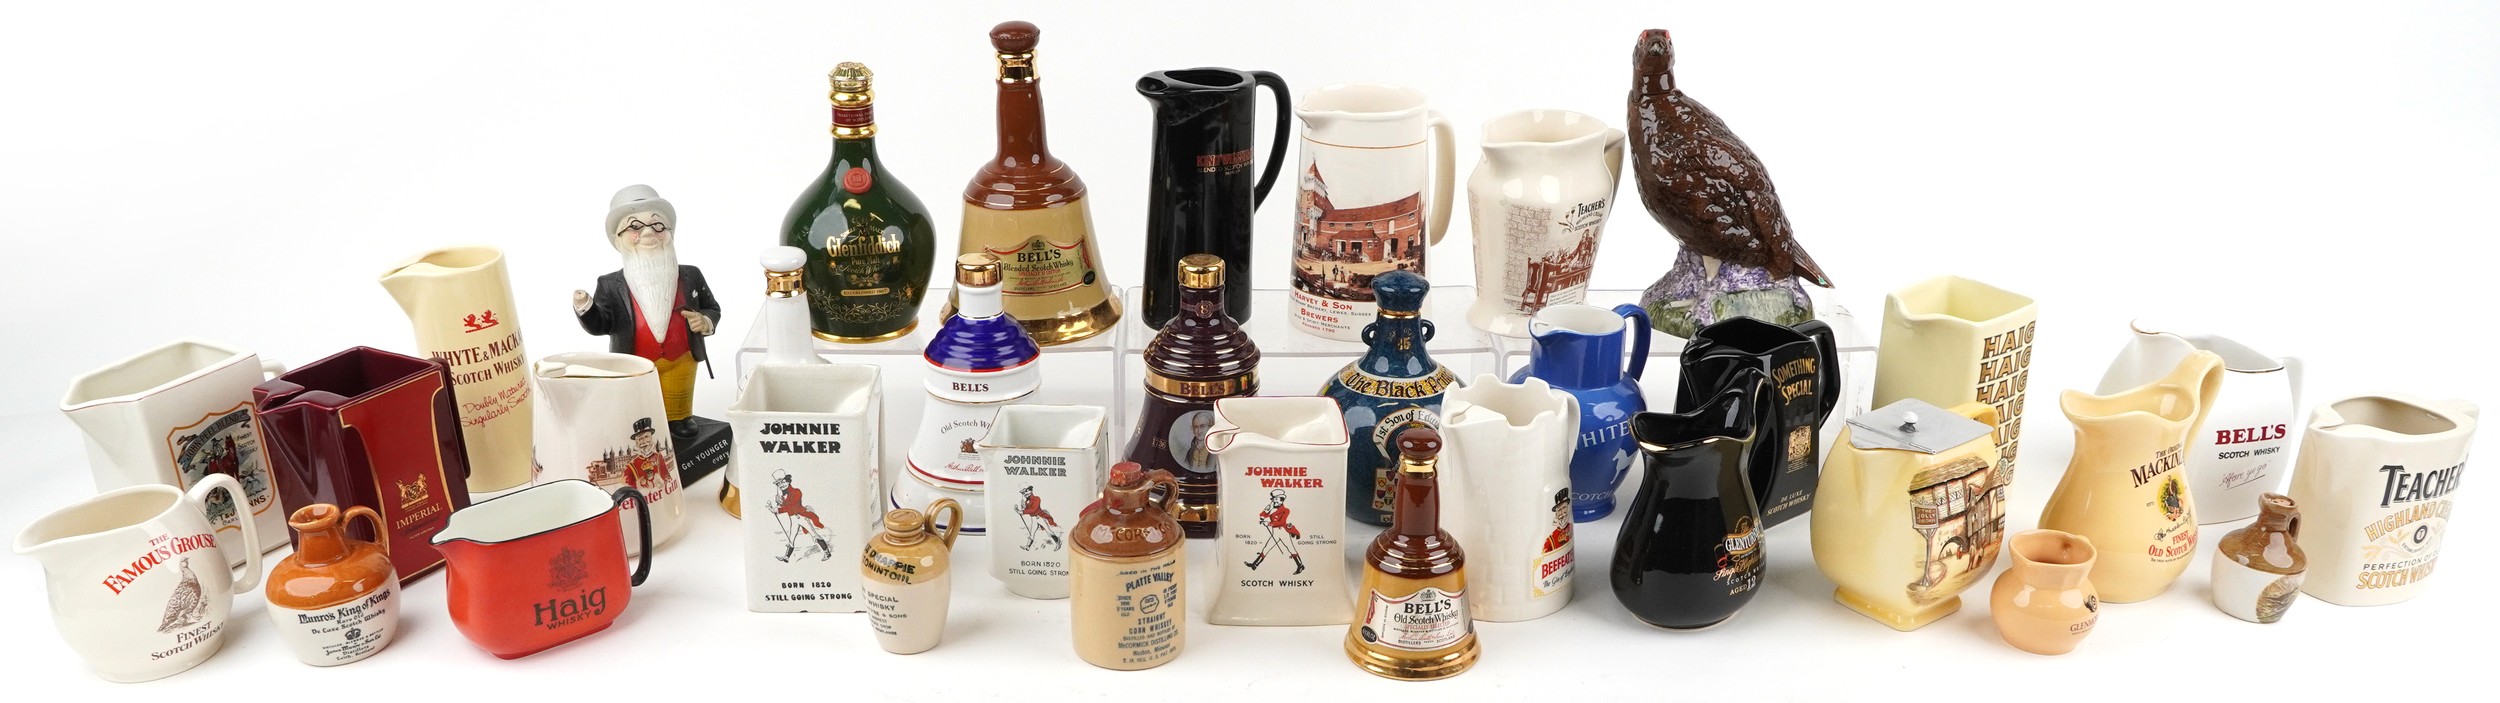 Collection of breweriana interest advertising pub jugs and flagons and an advertising figure